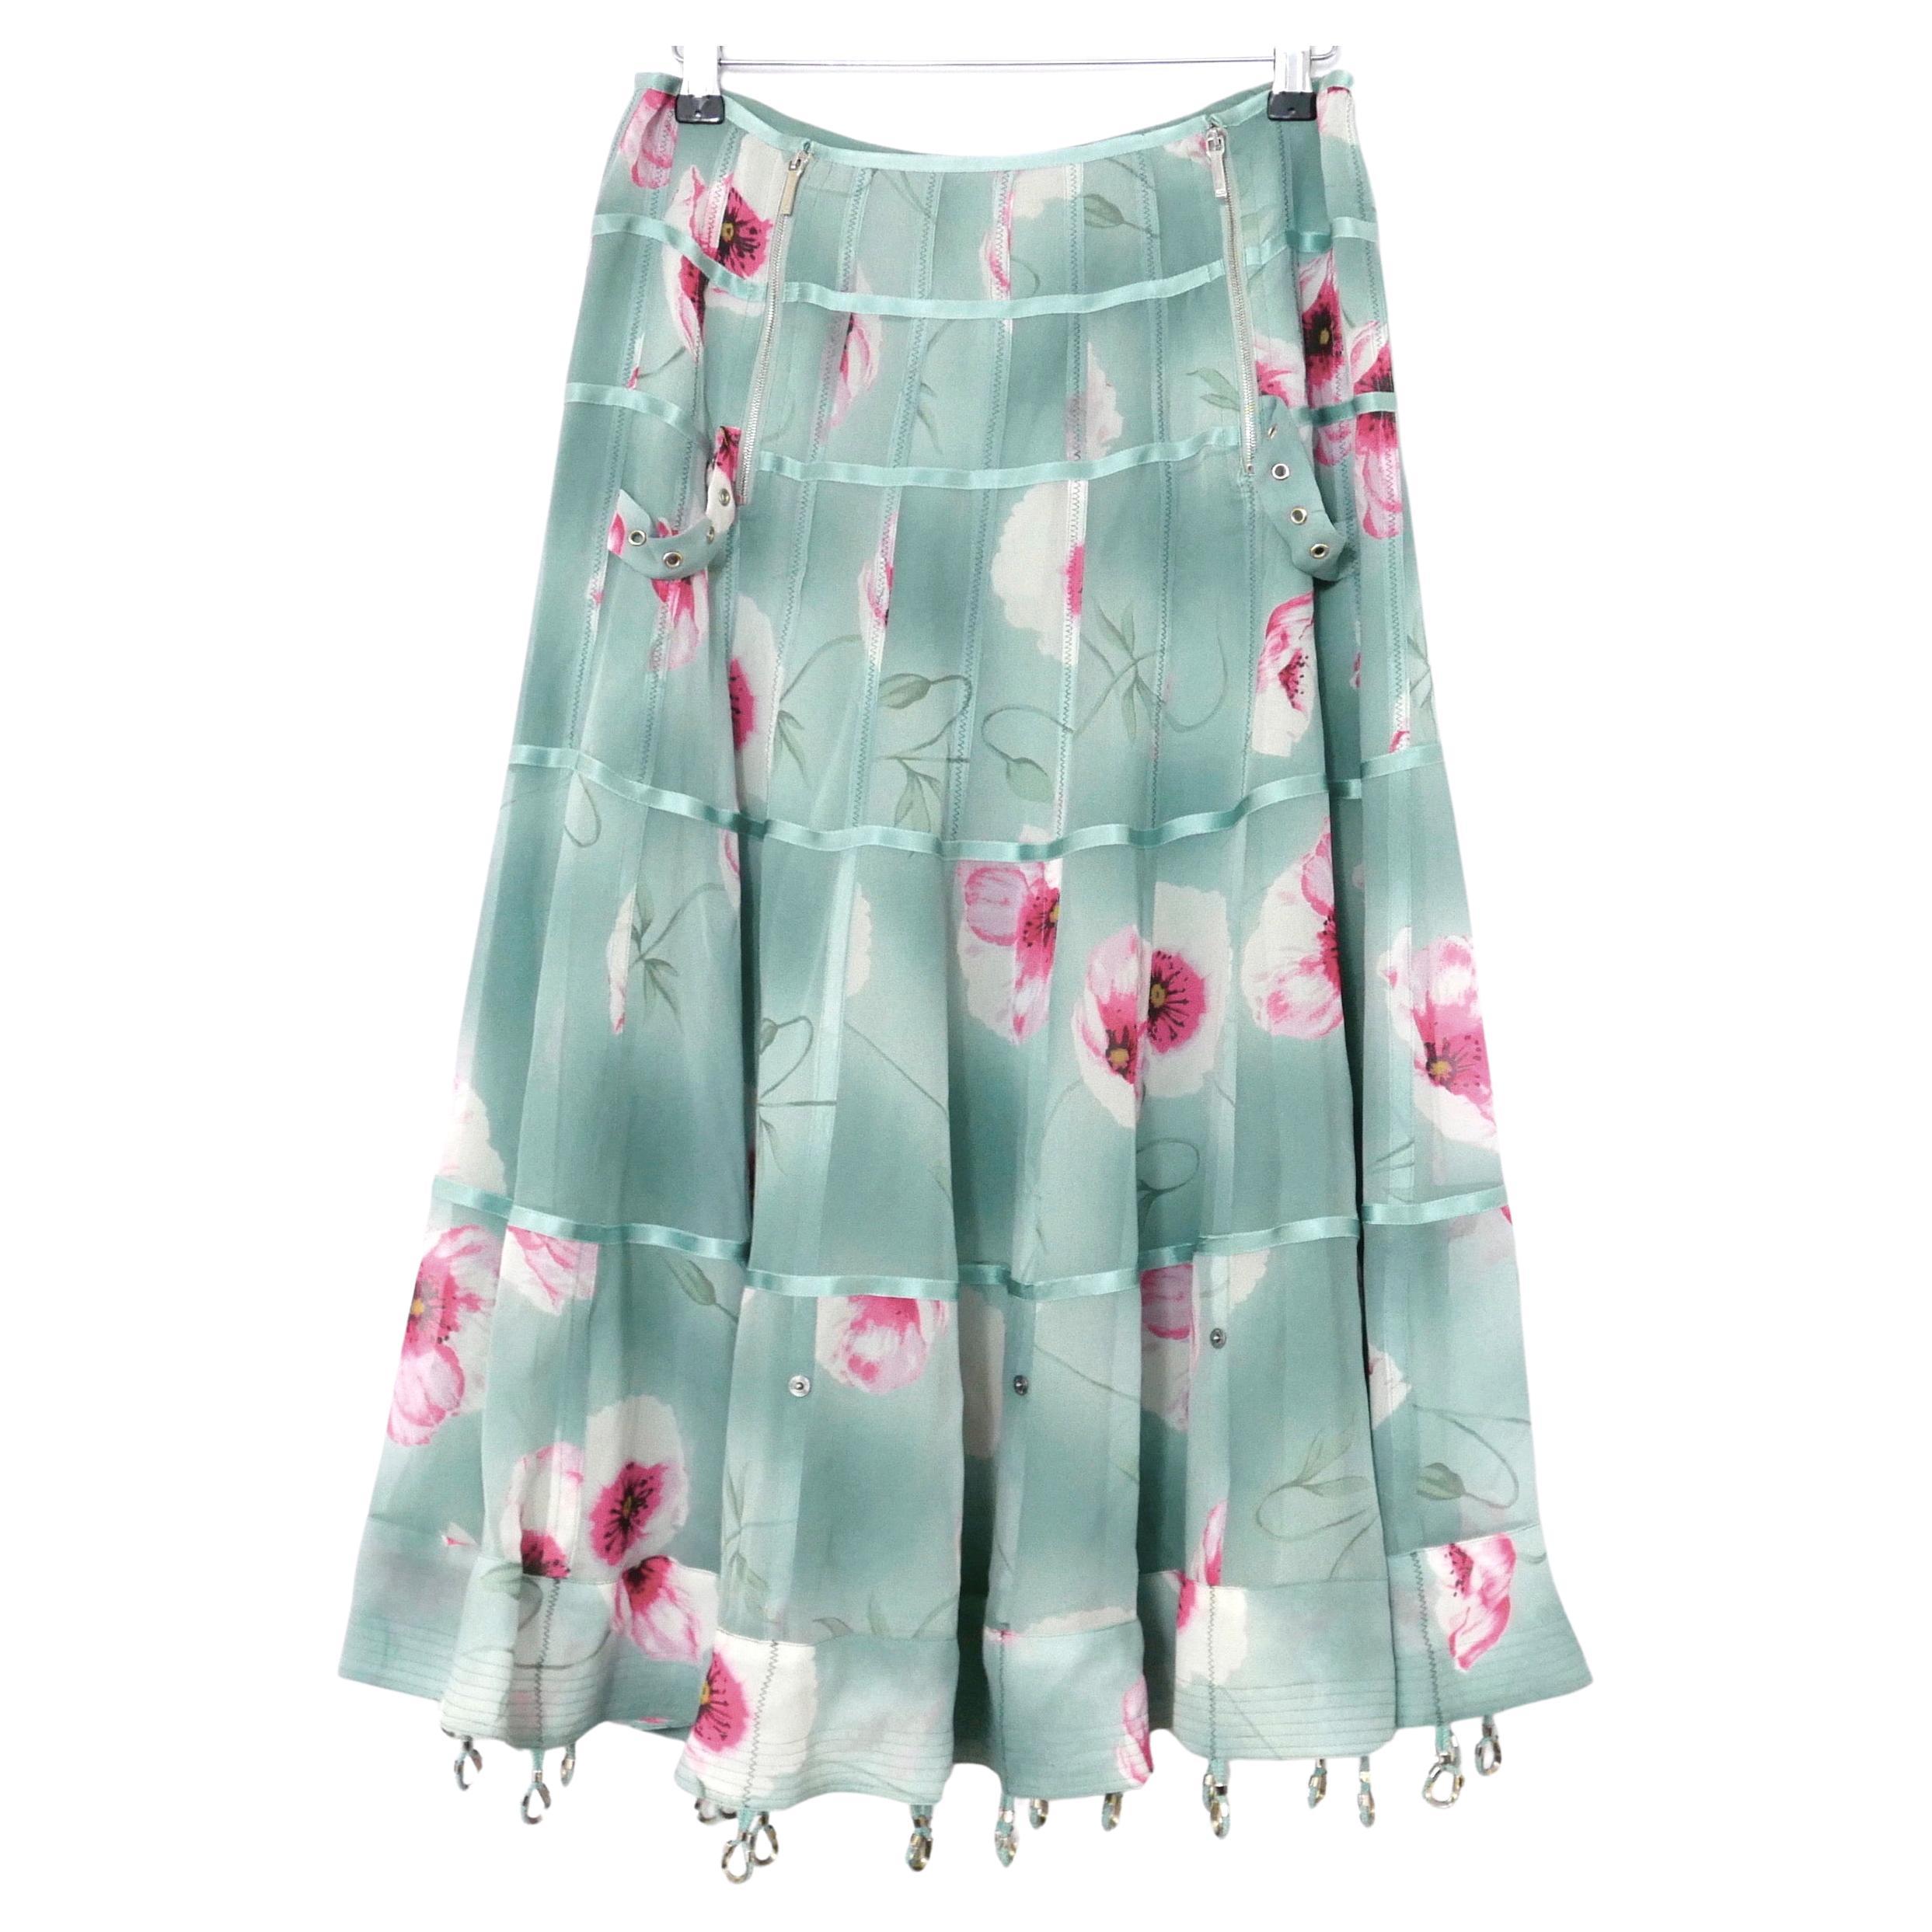 Christian Dior x Galliano 2003 Floral Silk Hardware Trimmed Maxi Skirt For Sale